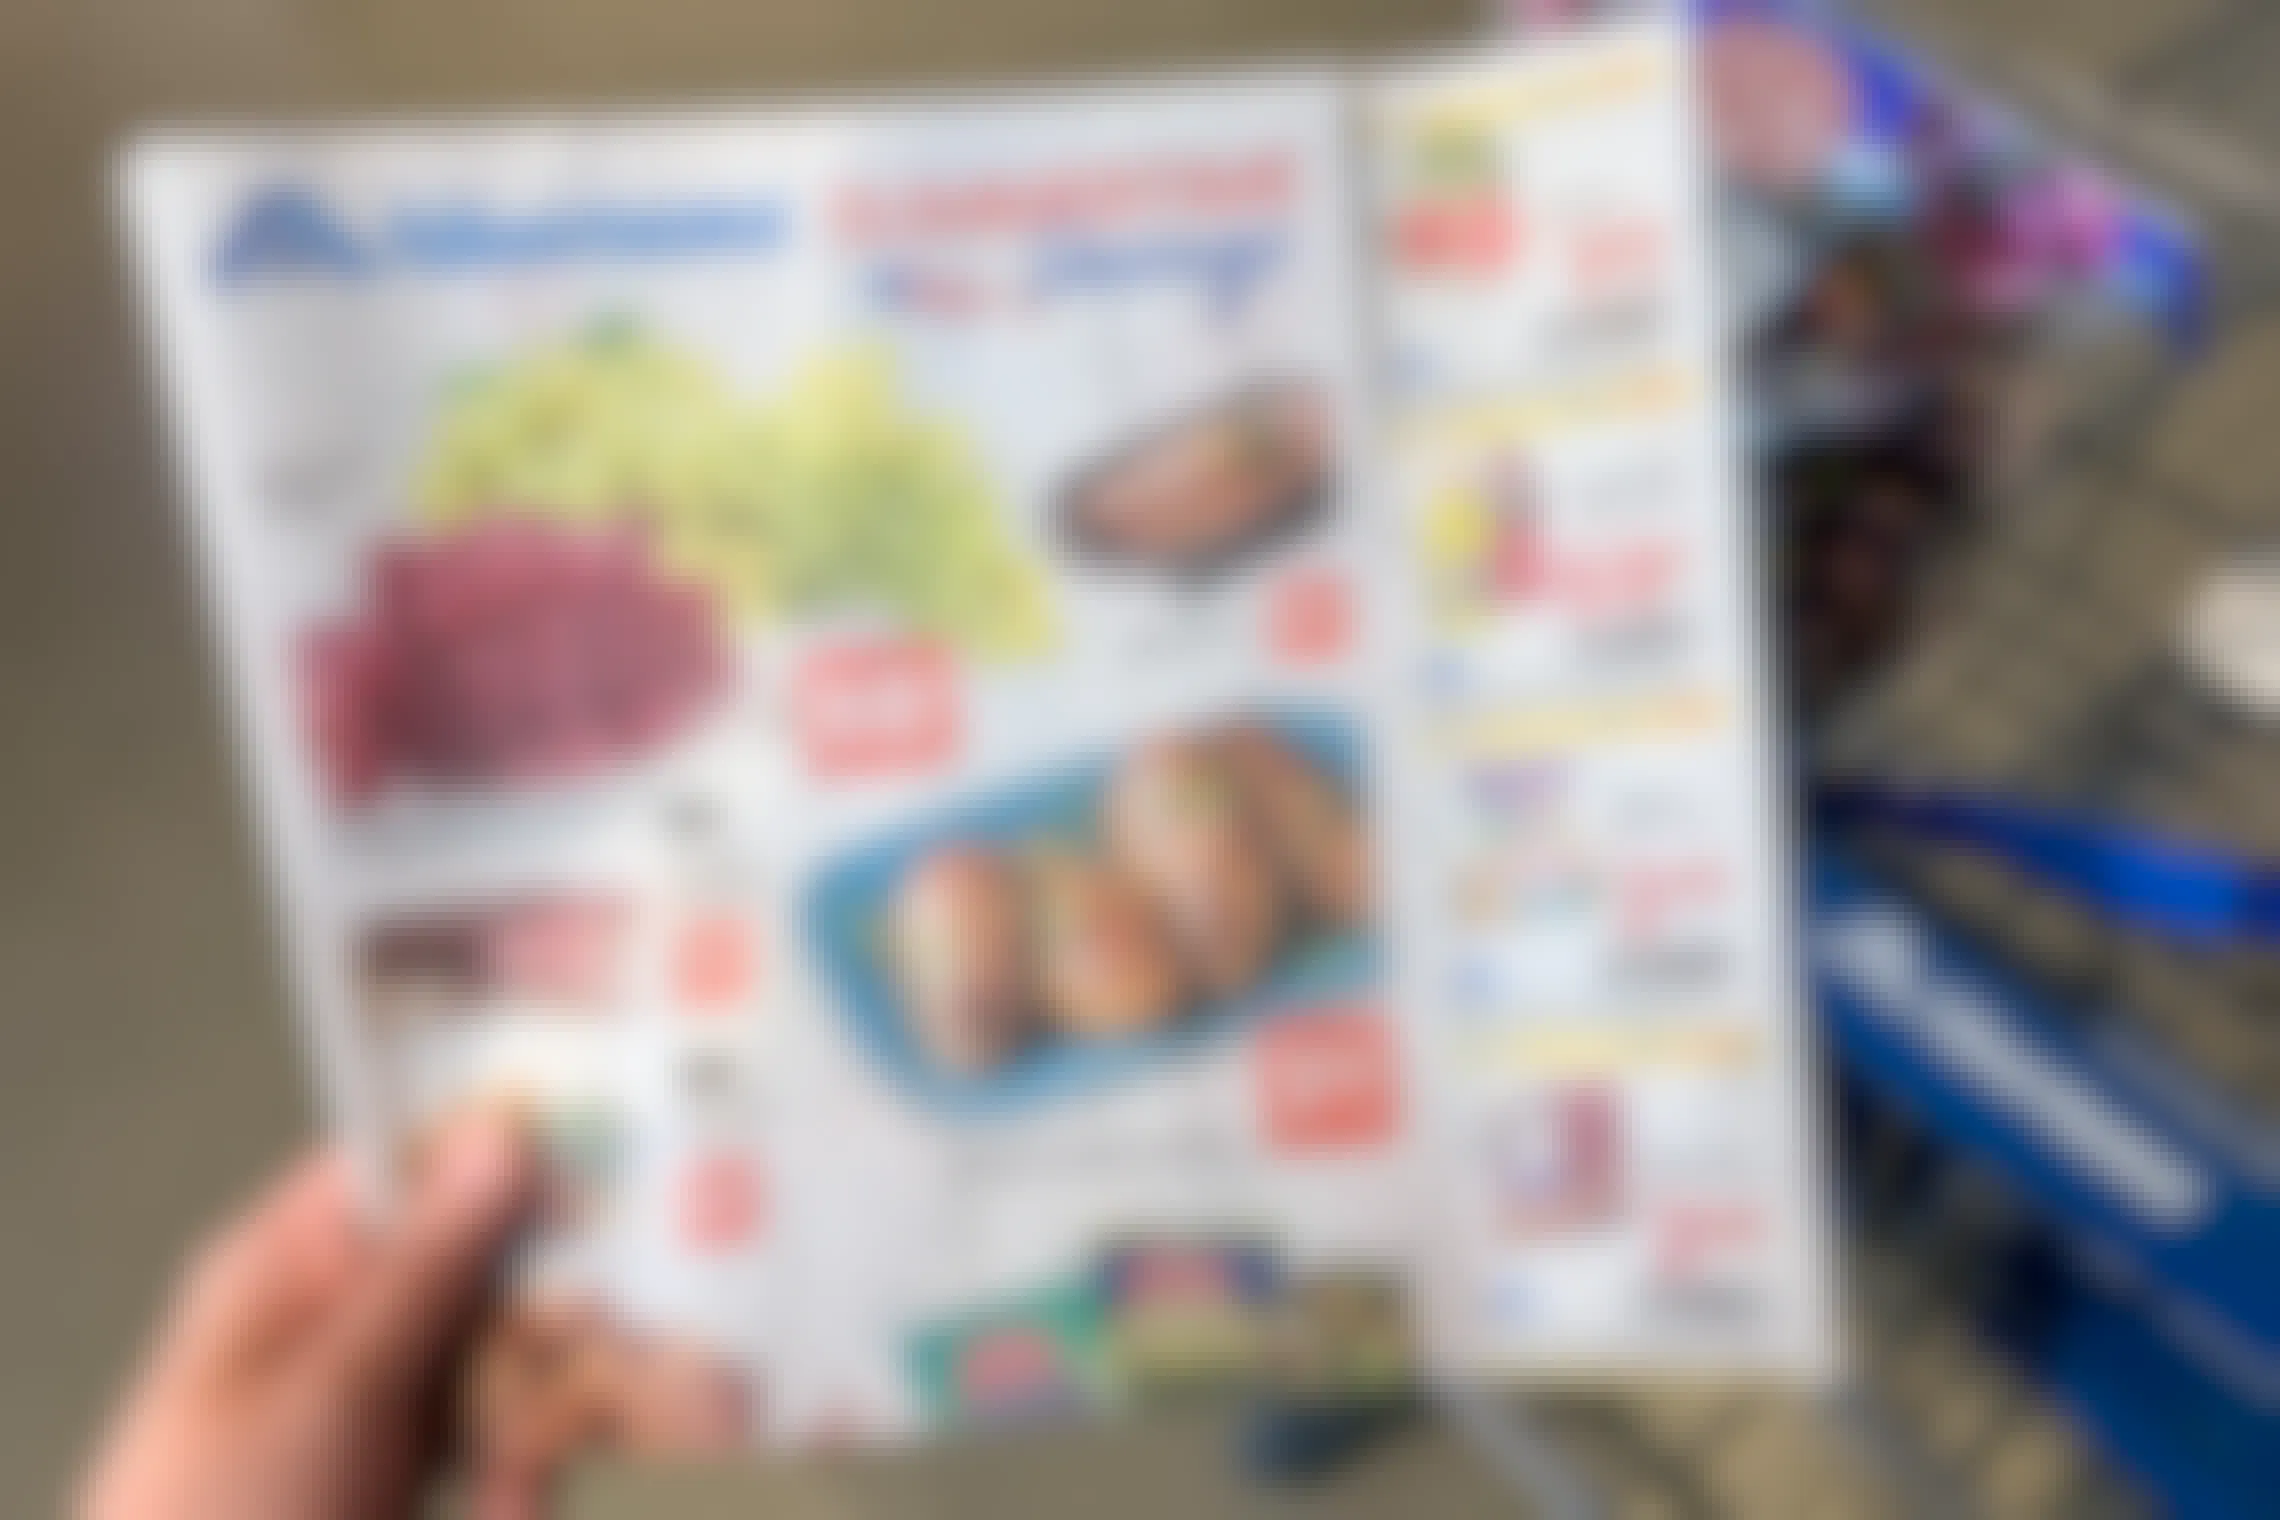 An Albertsons ad with coupons held inside a store.